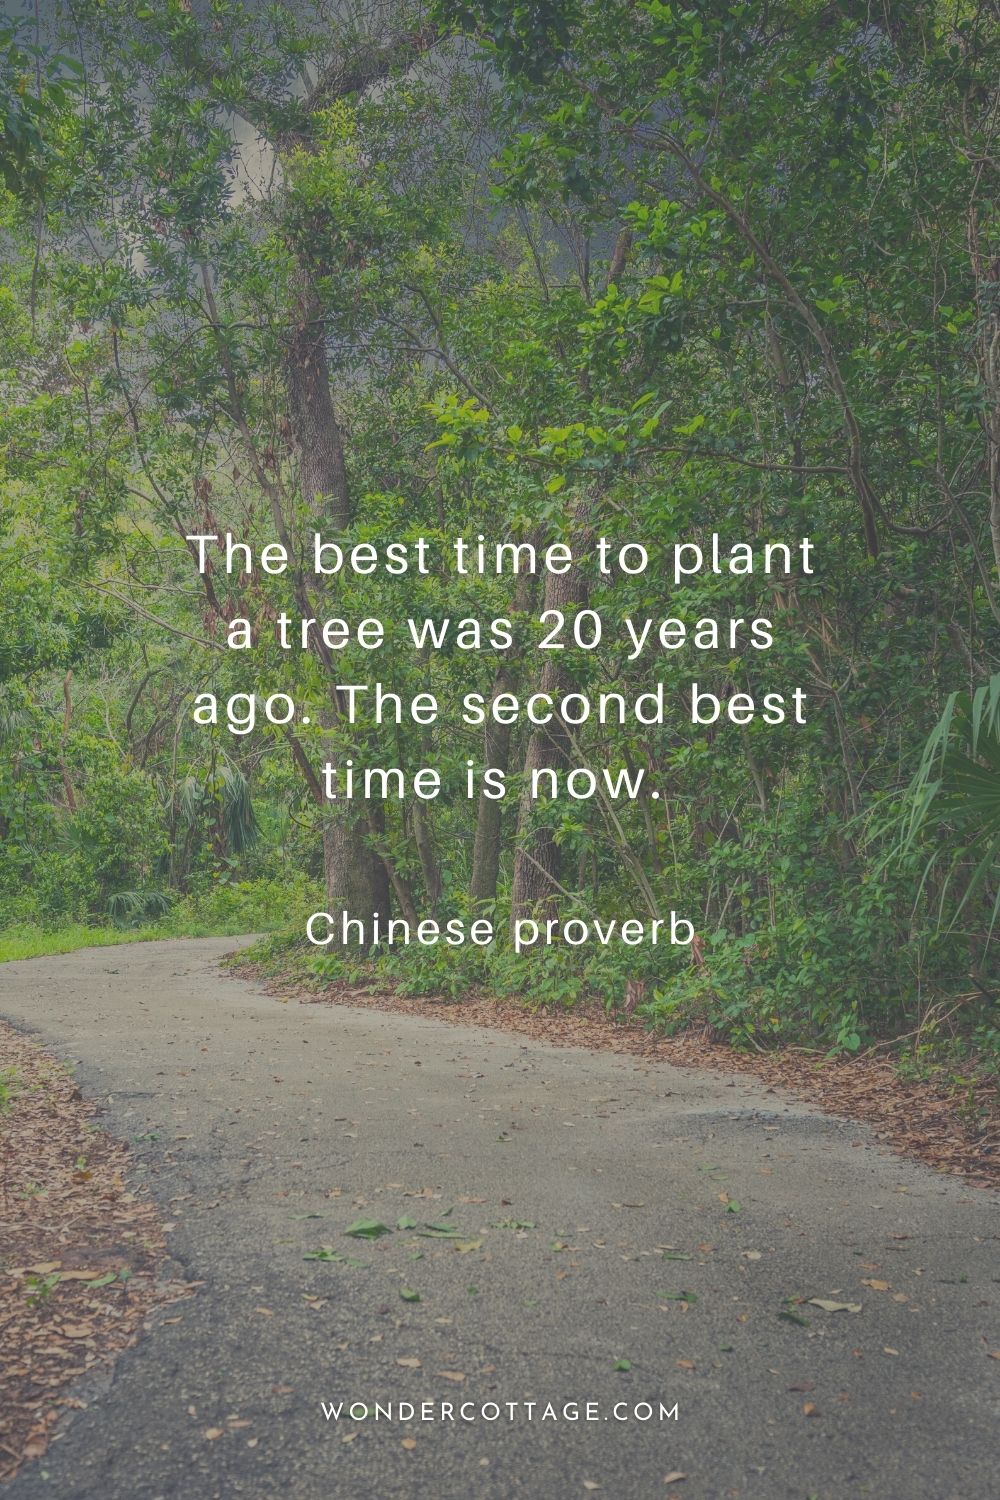 The best time to plant a tree was 20 years ago. The second best time is now.  Chinese proverb